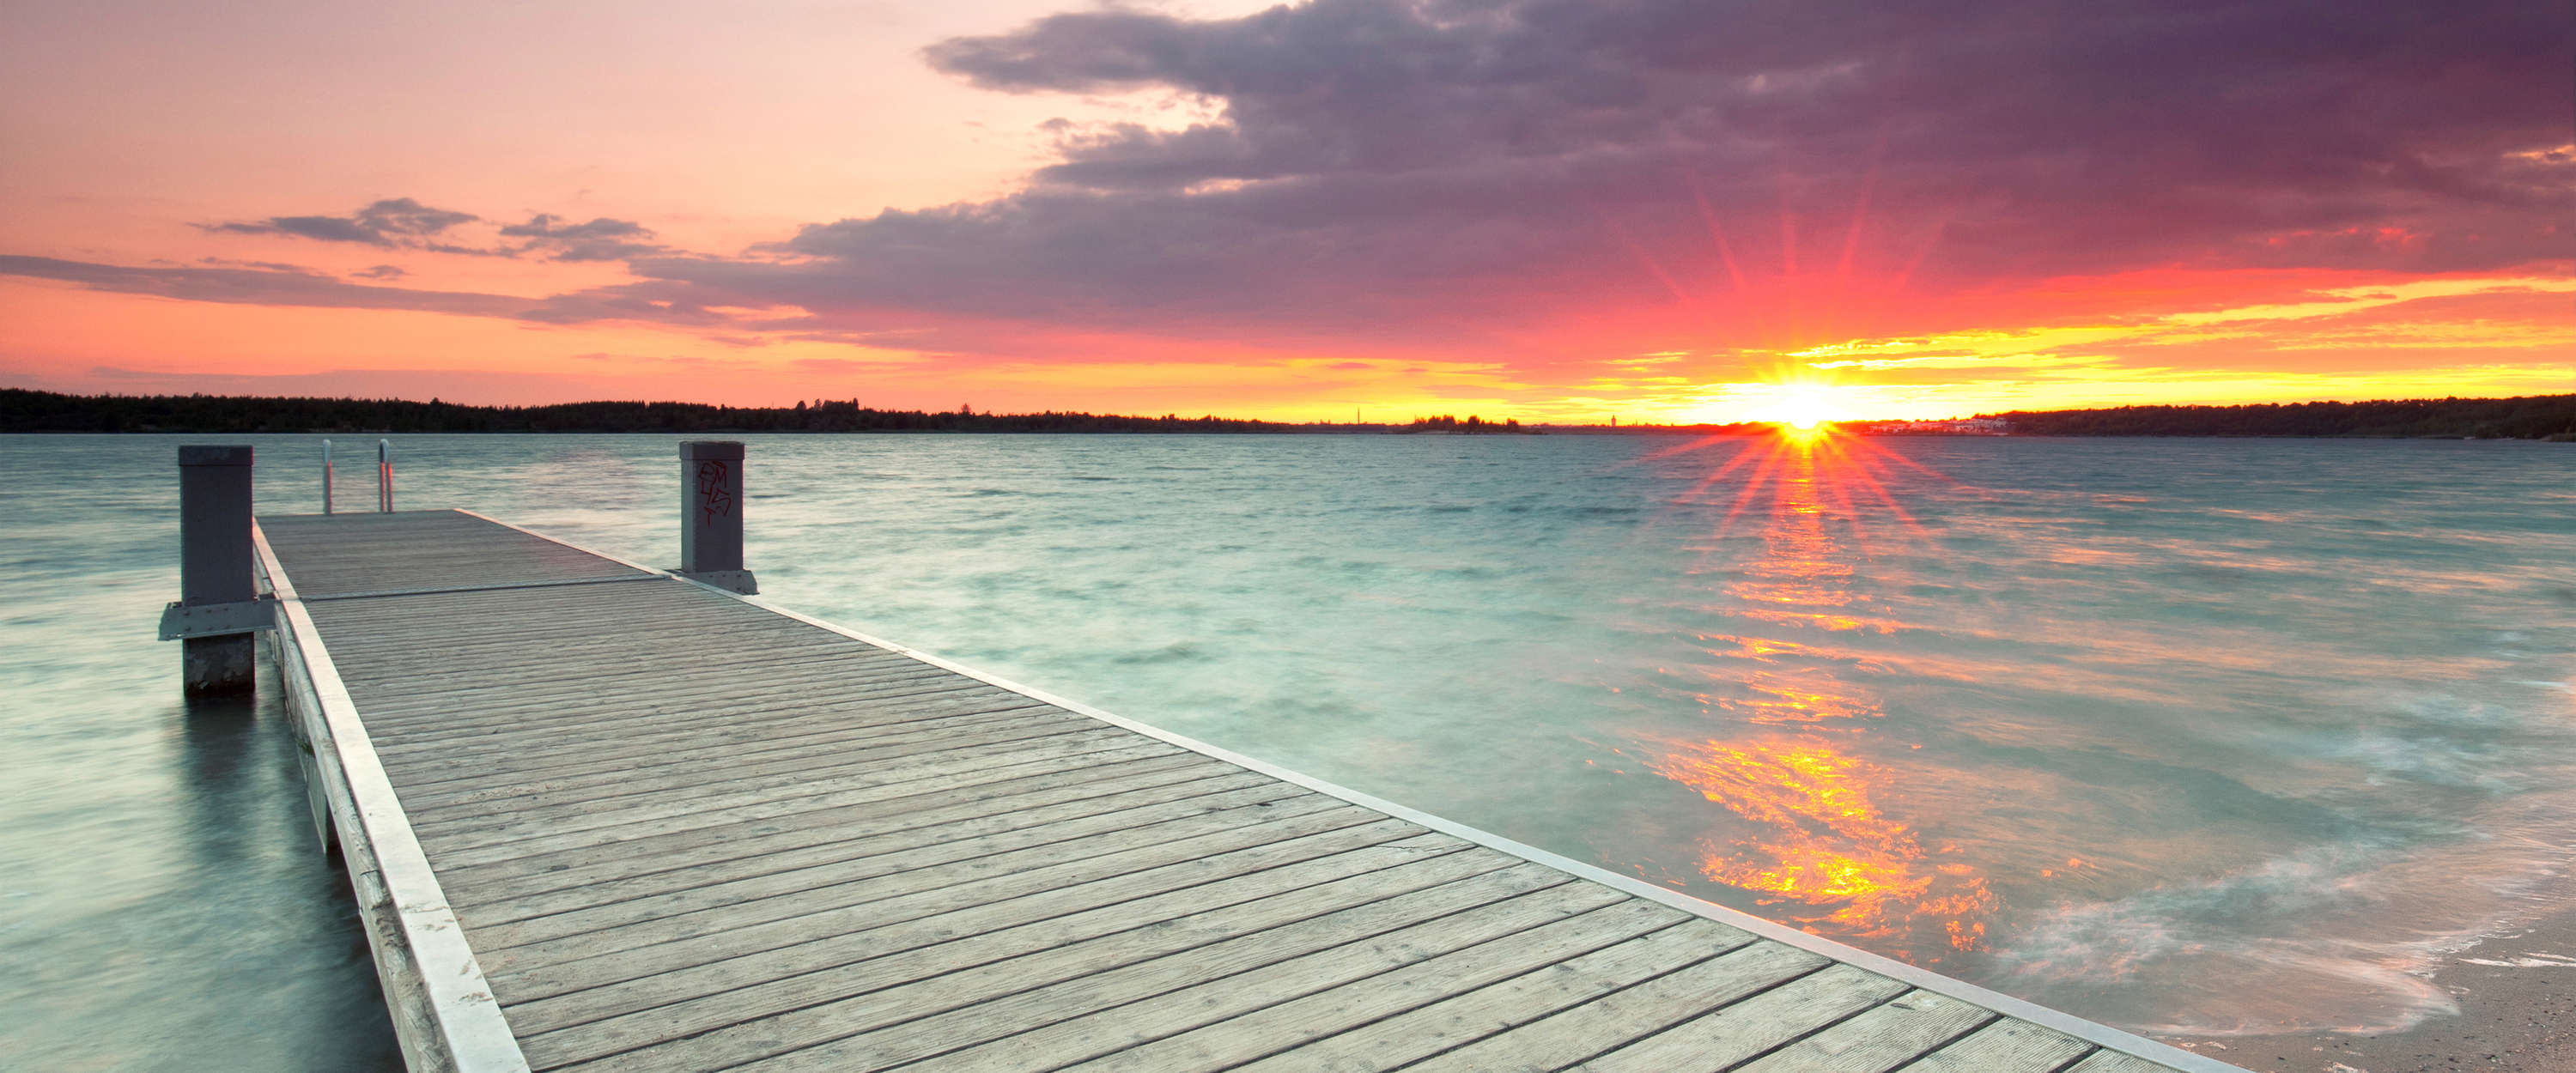             Photo wallpaper wooden jetty in the water at sunset
        